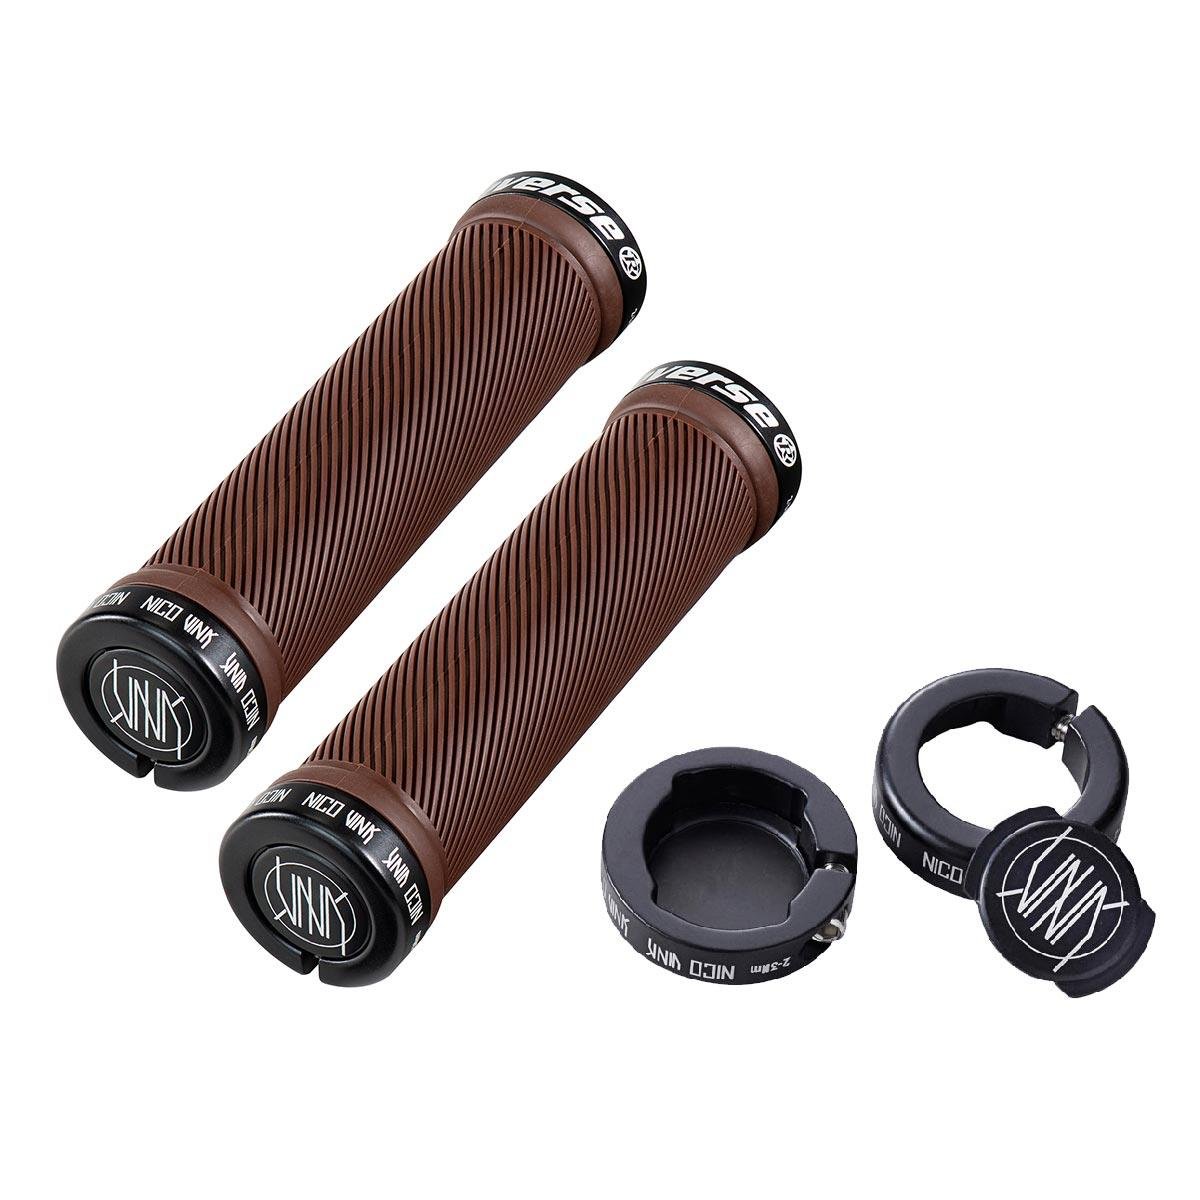 Reverse Components MTB Grips Nico Vink Signature Lock-On System, 30 x 130 mm, Brown/Black